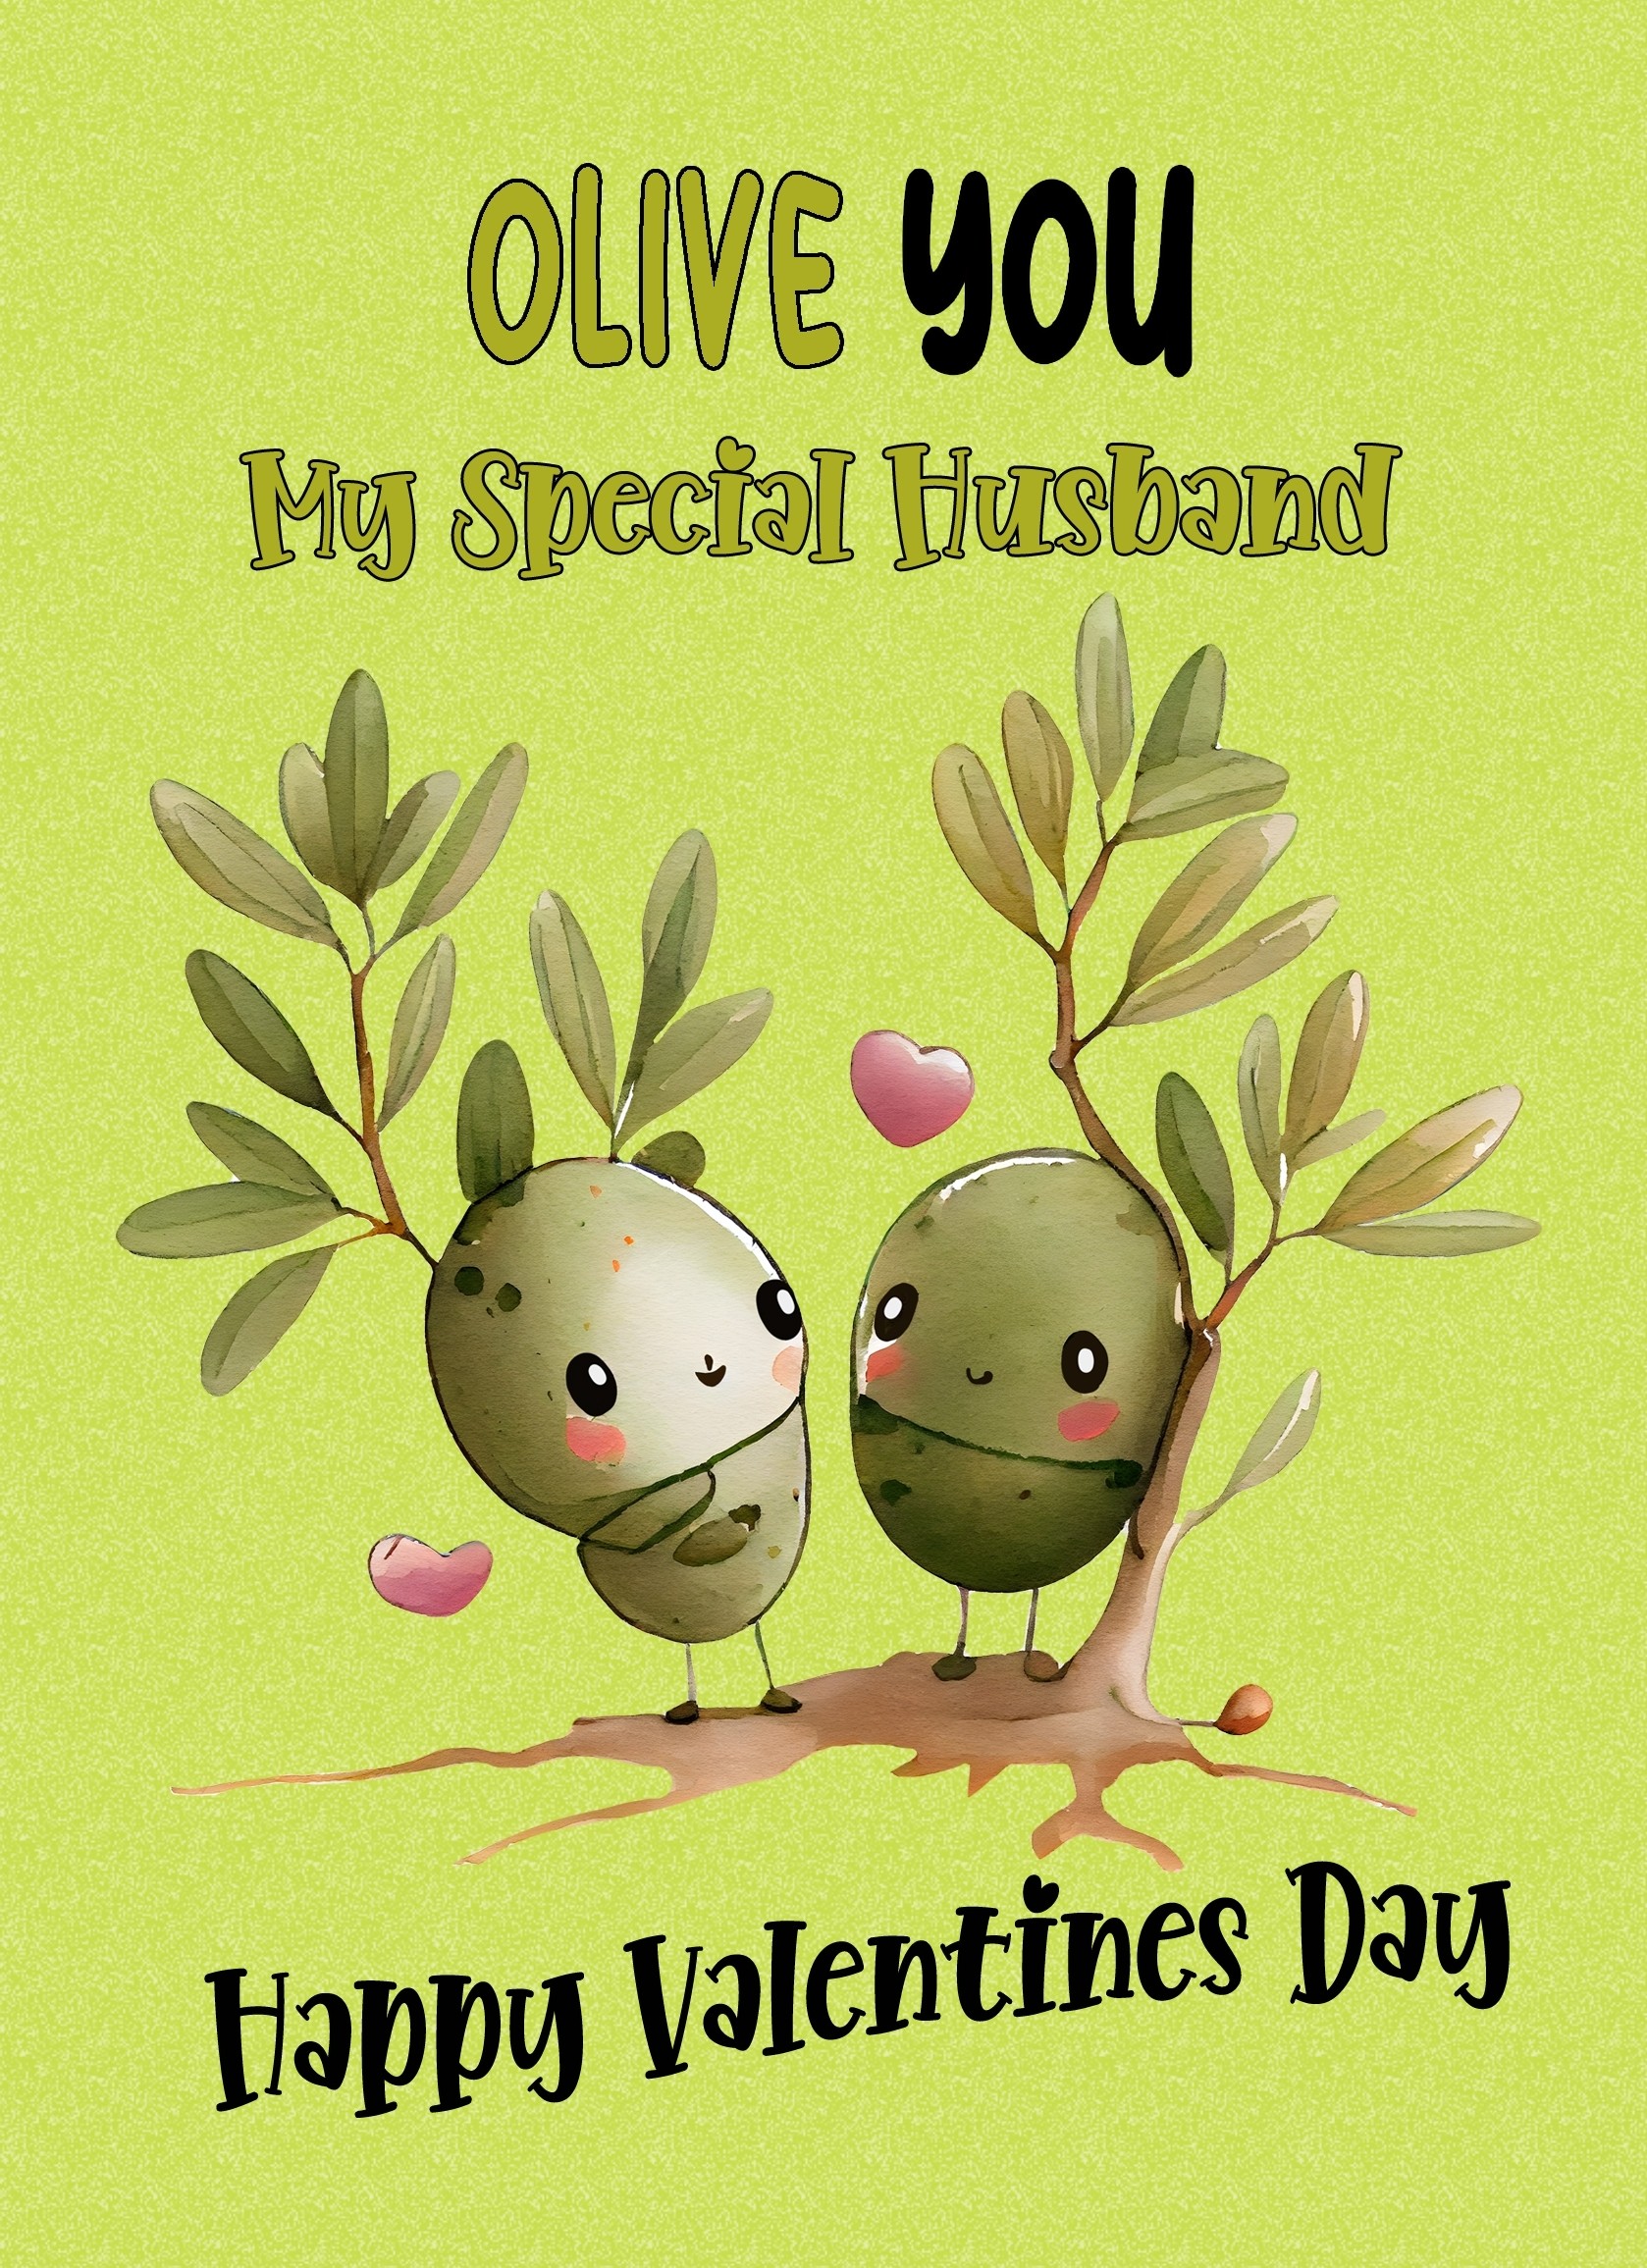 Funny Pun Valentines Day Card for Husband (Olive You)